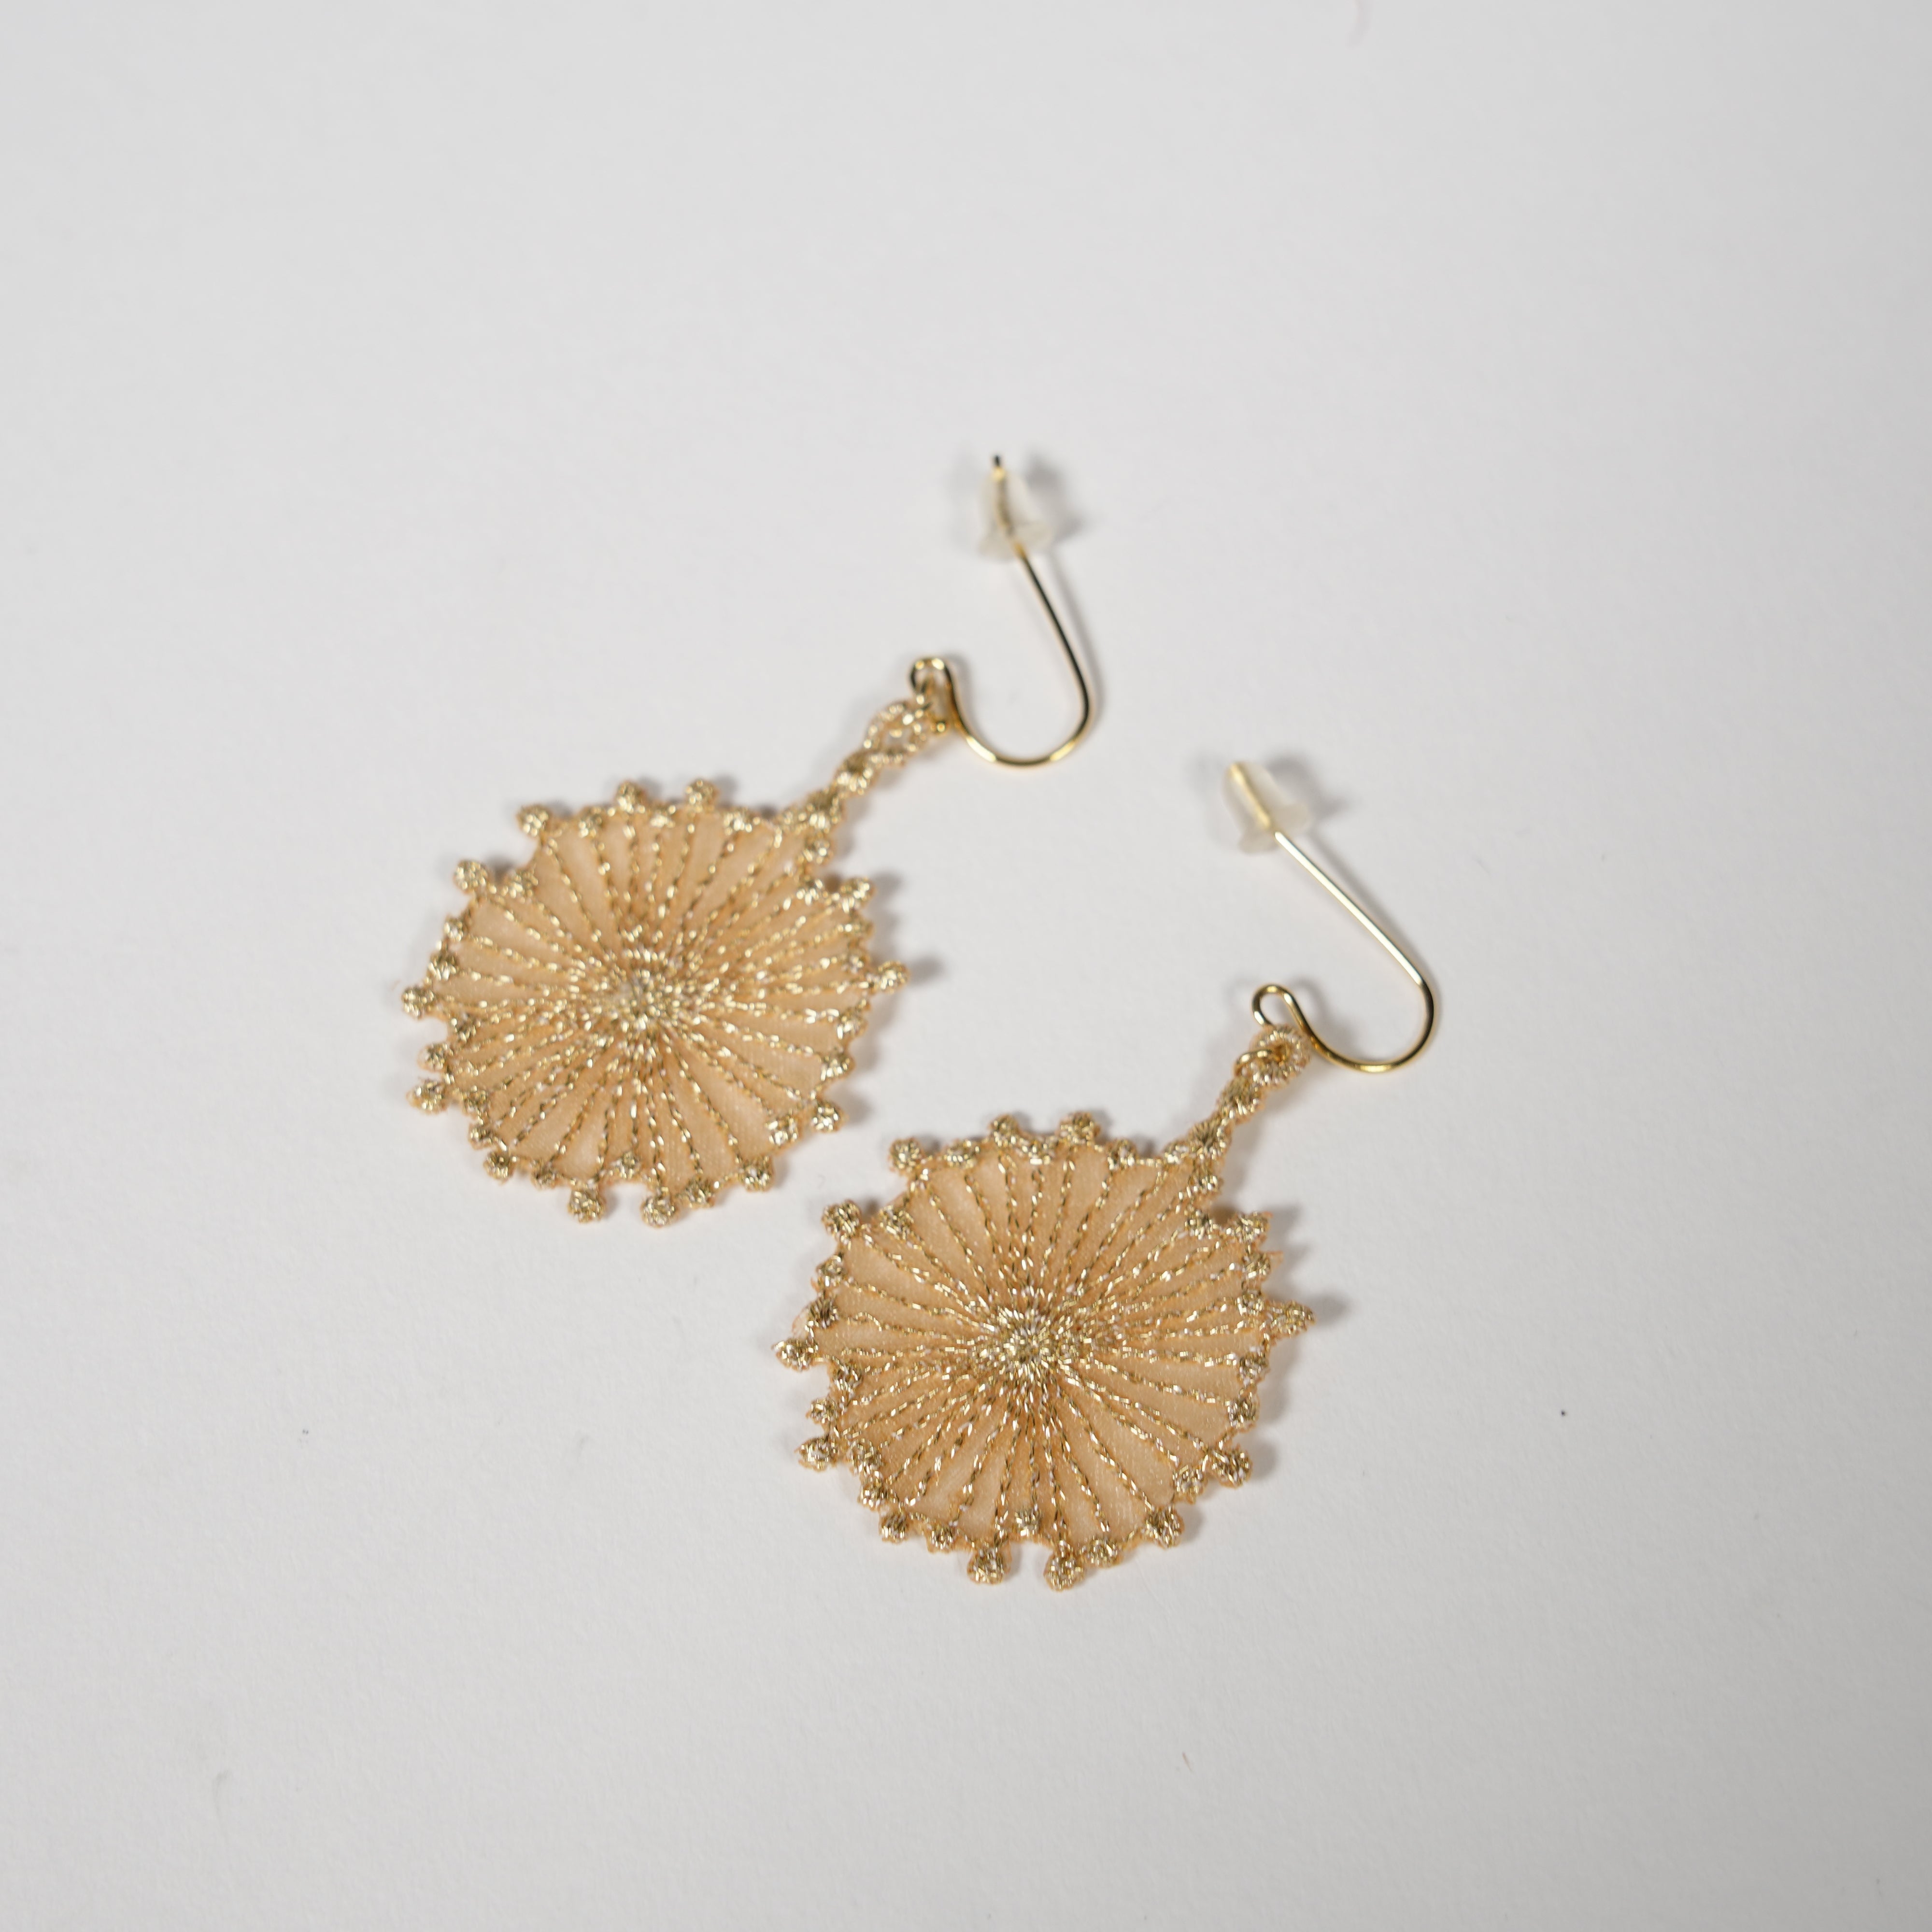 Aggregate more than 217 long thread earrings online super hot